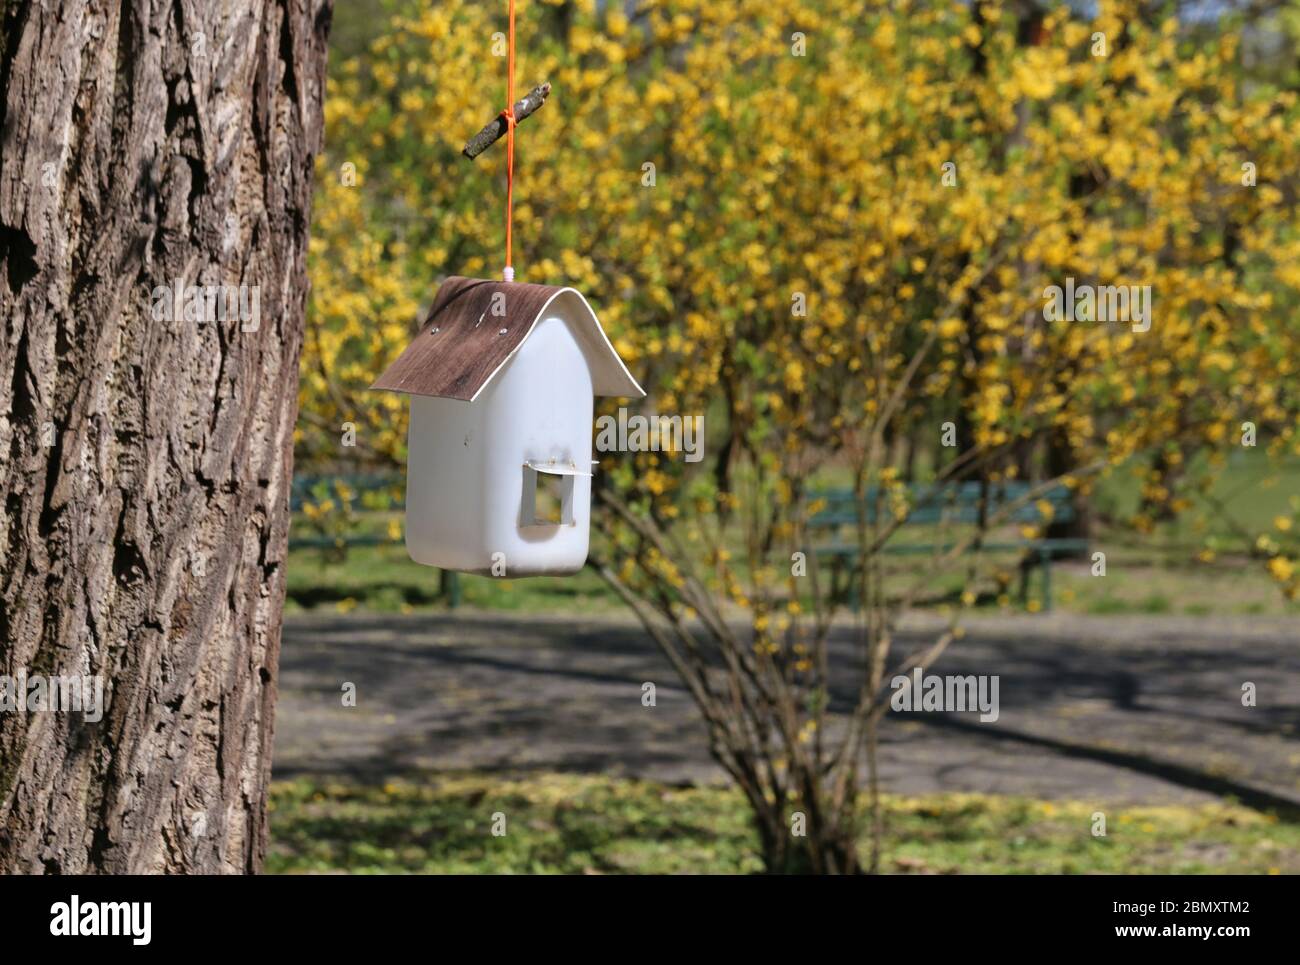 Cracow. Krakow. Poland. Feeder for the birds made of plastic bottle hanging on the branch of the tree. Stock Photo